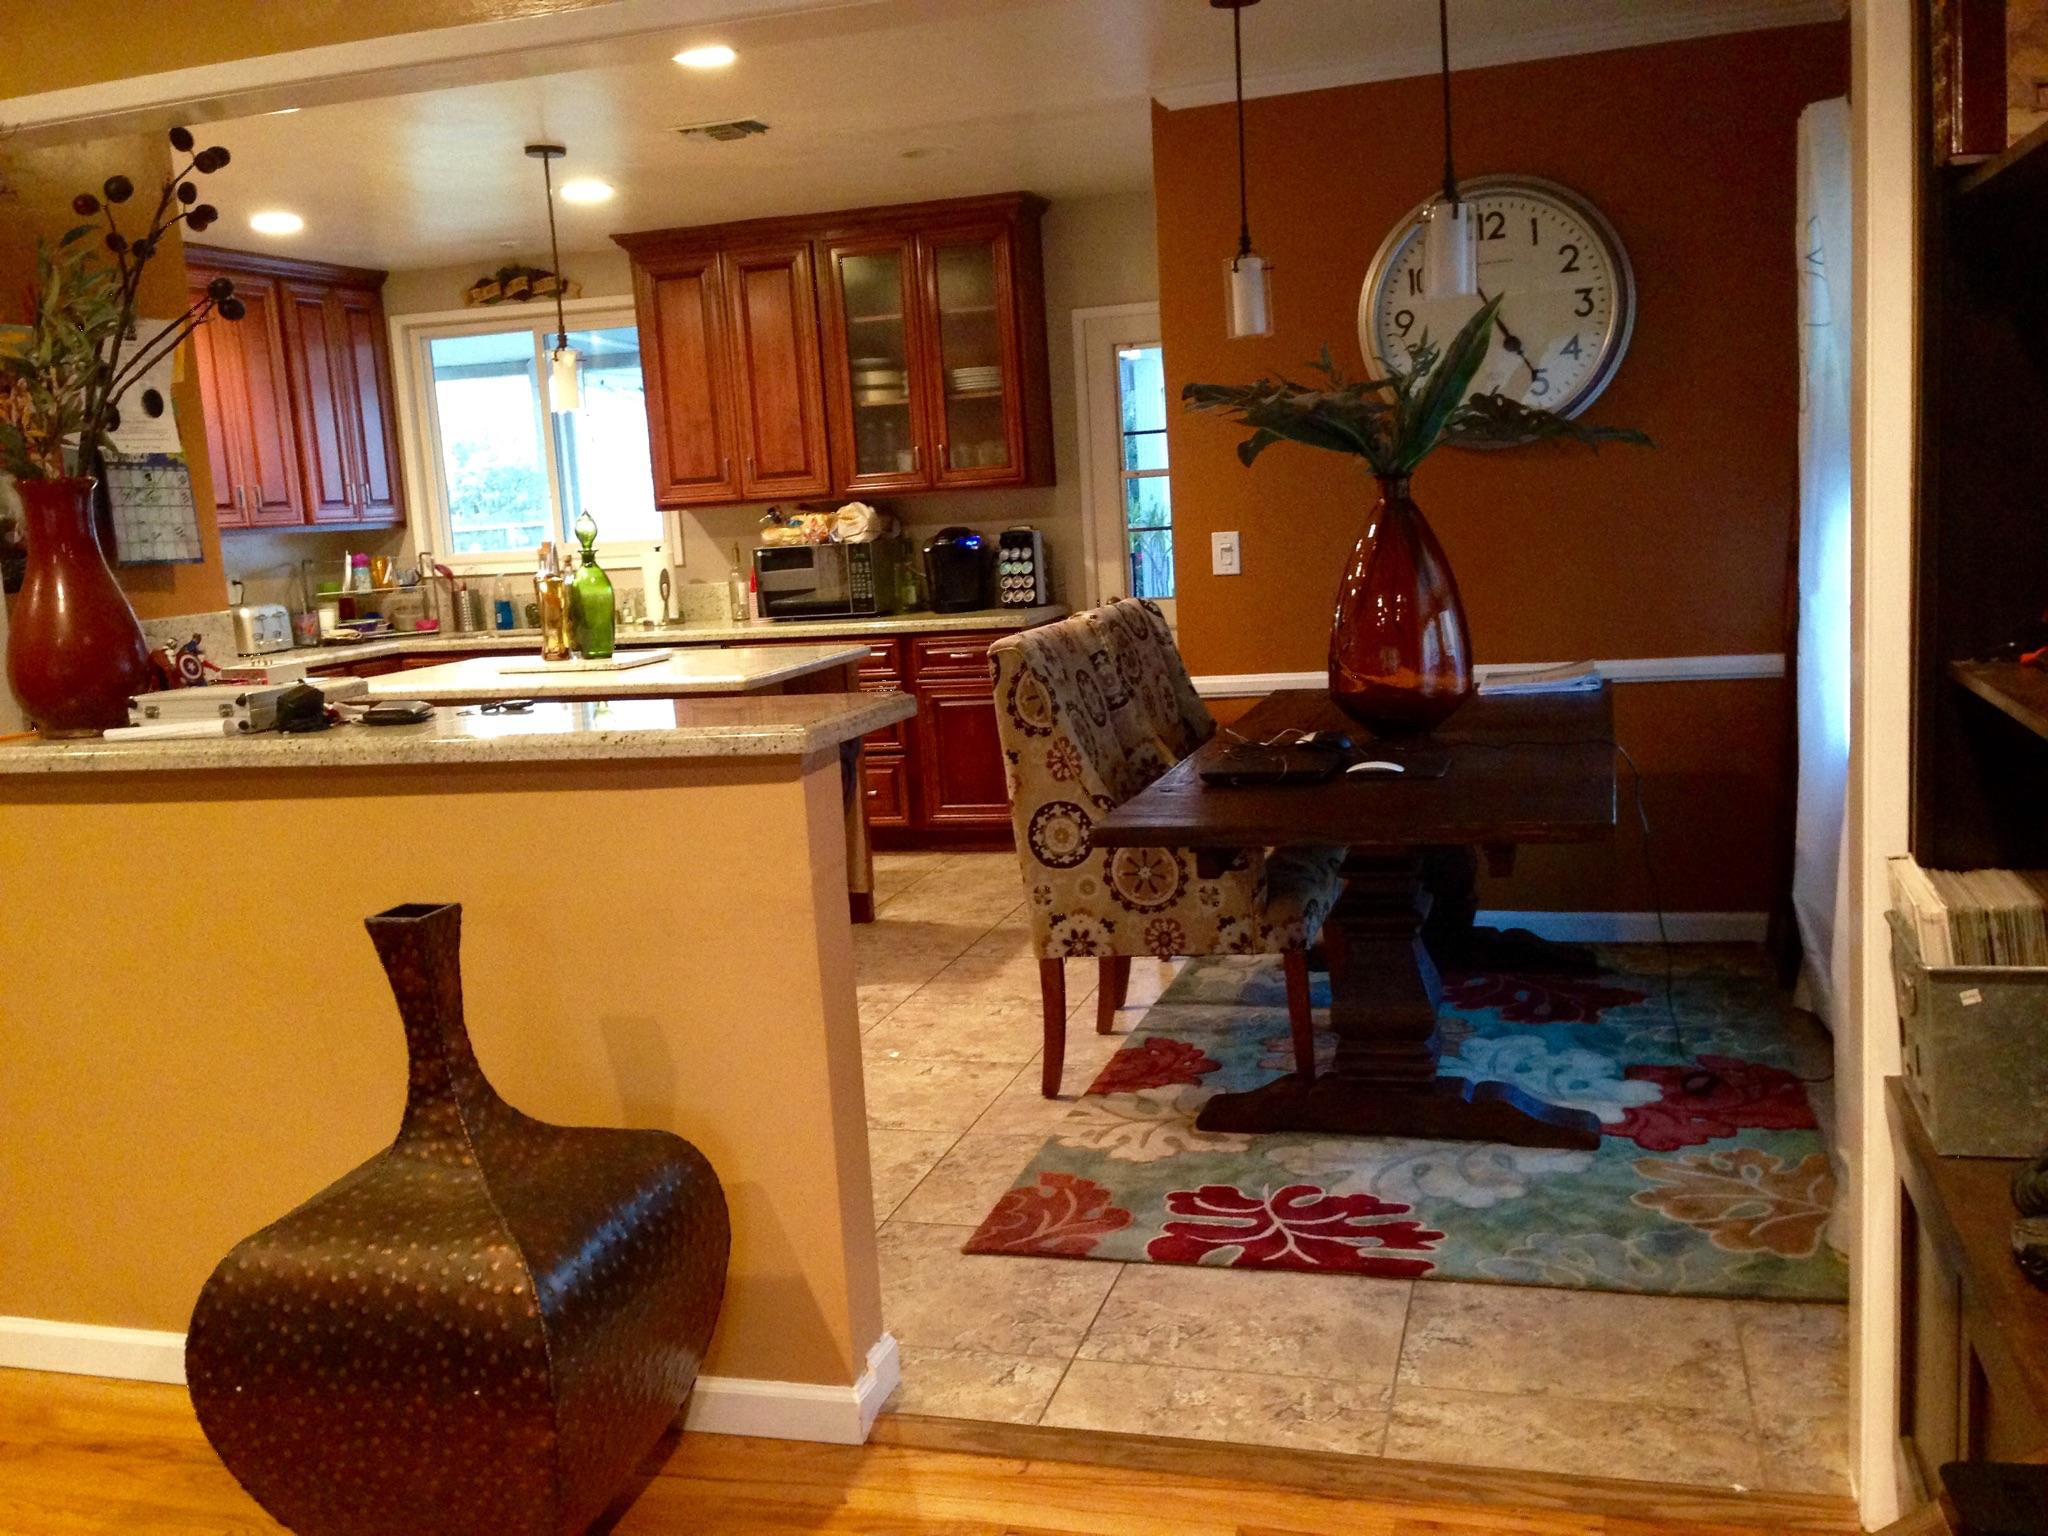 Kitchens and Common Areas